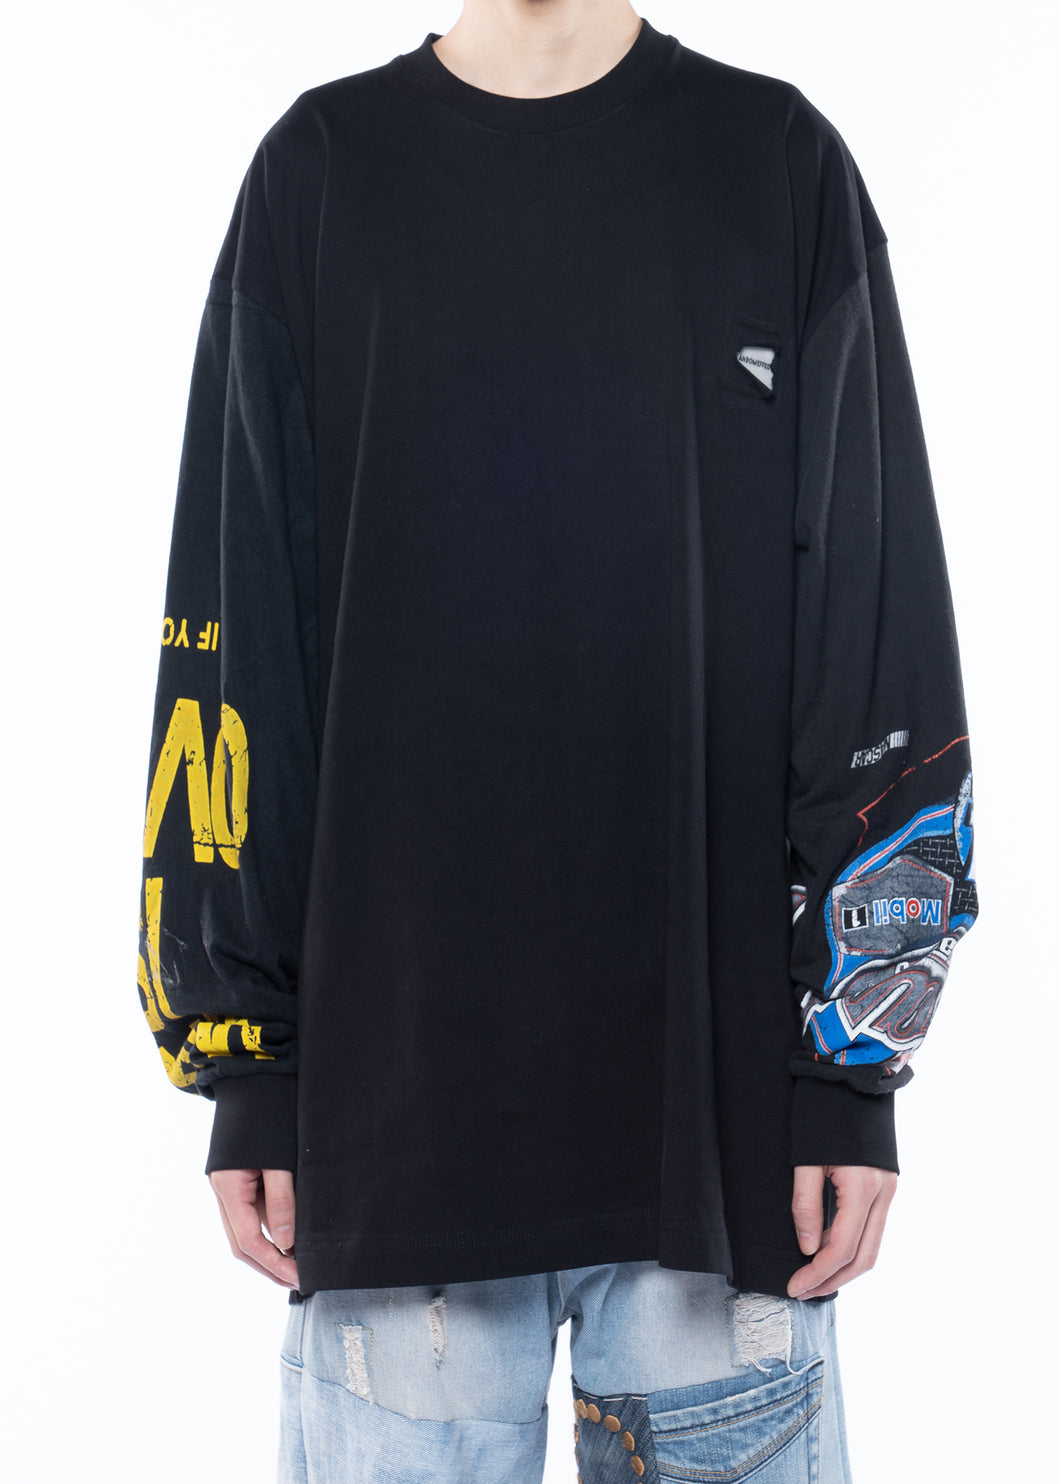 RANDOMEFFECT Patched Sleeves Long Tee